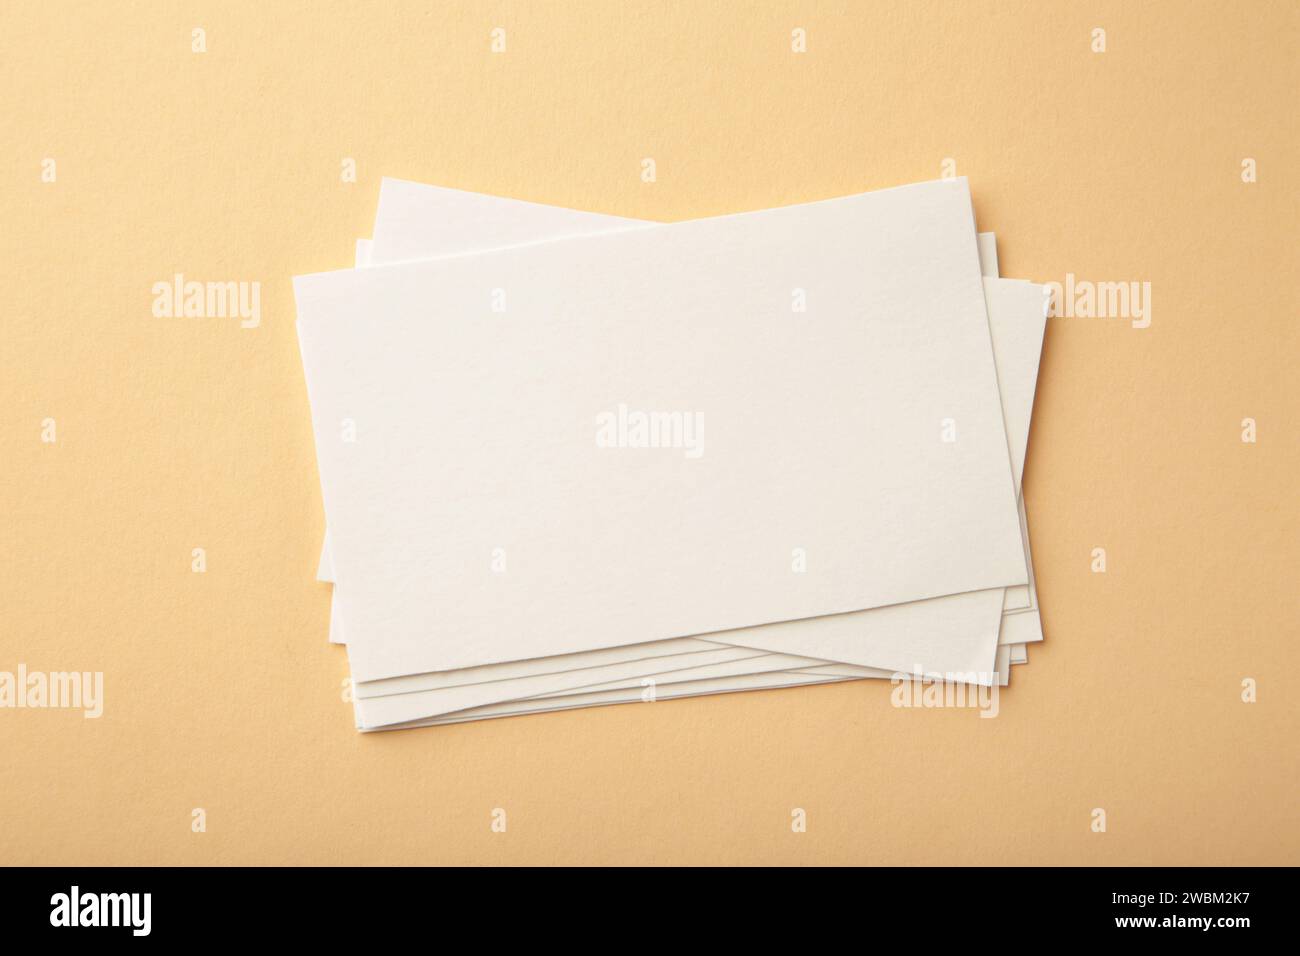 Blank white business cards on beige paper background. Mockup for branding identity. Template for graphic designers portfolios. Stock Photo